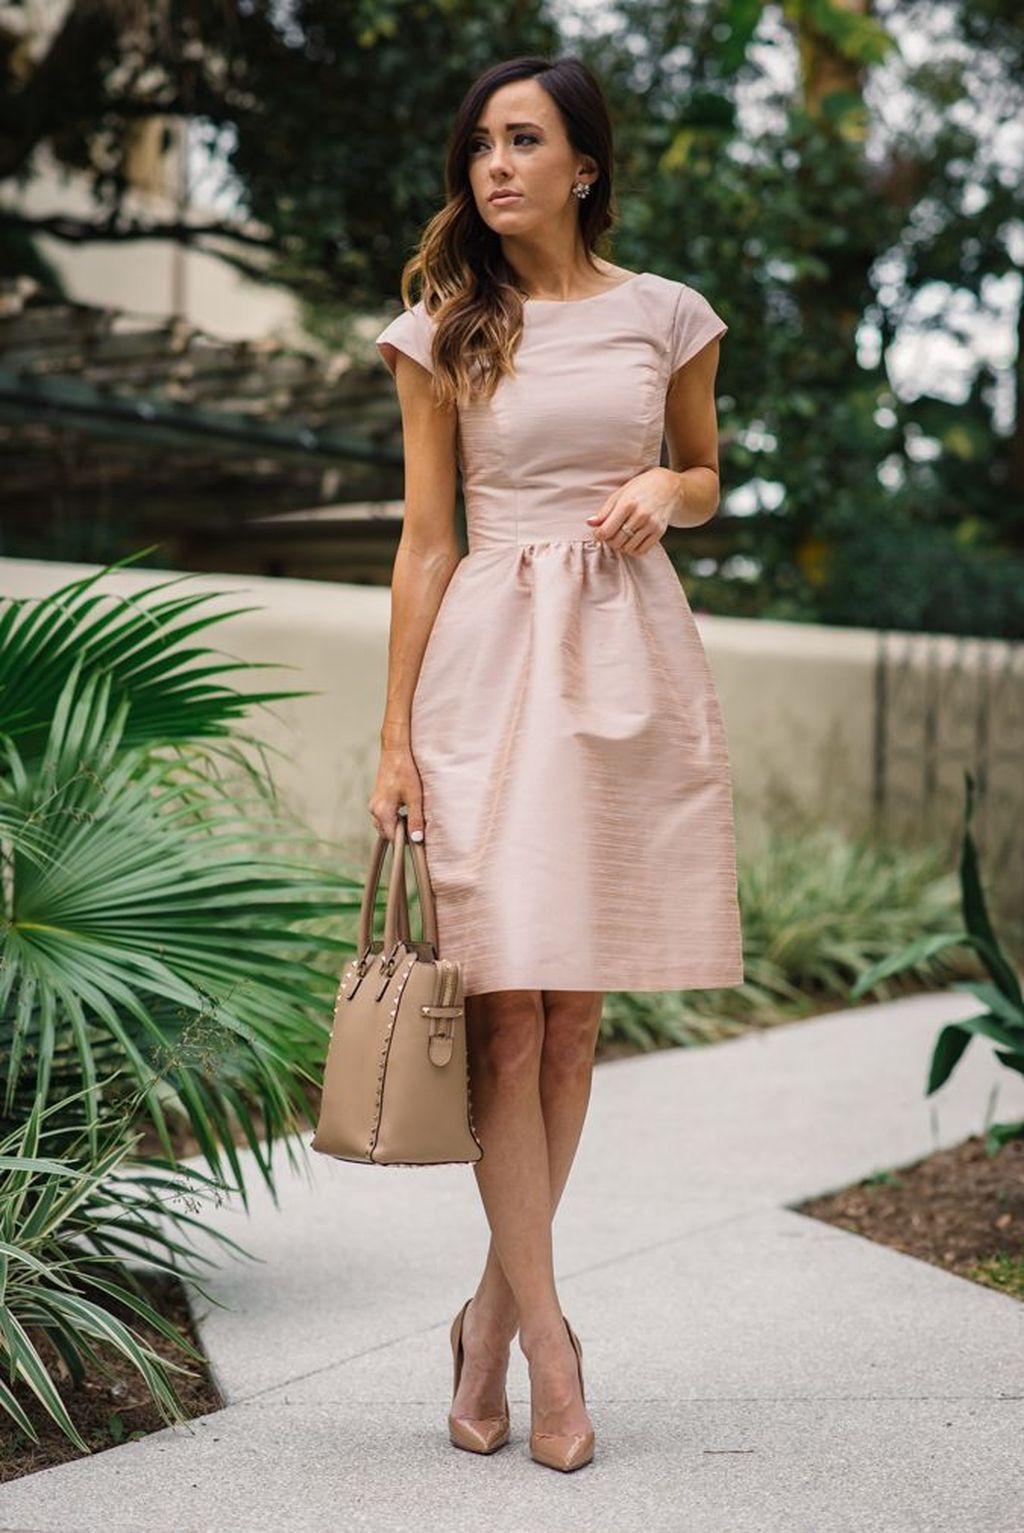 Awesome 42 Stylish Long Summer Wedding Guest Dresses. More ...